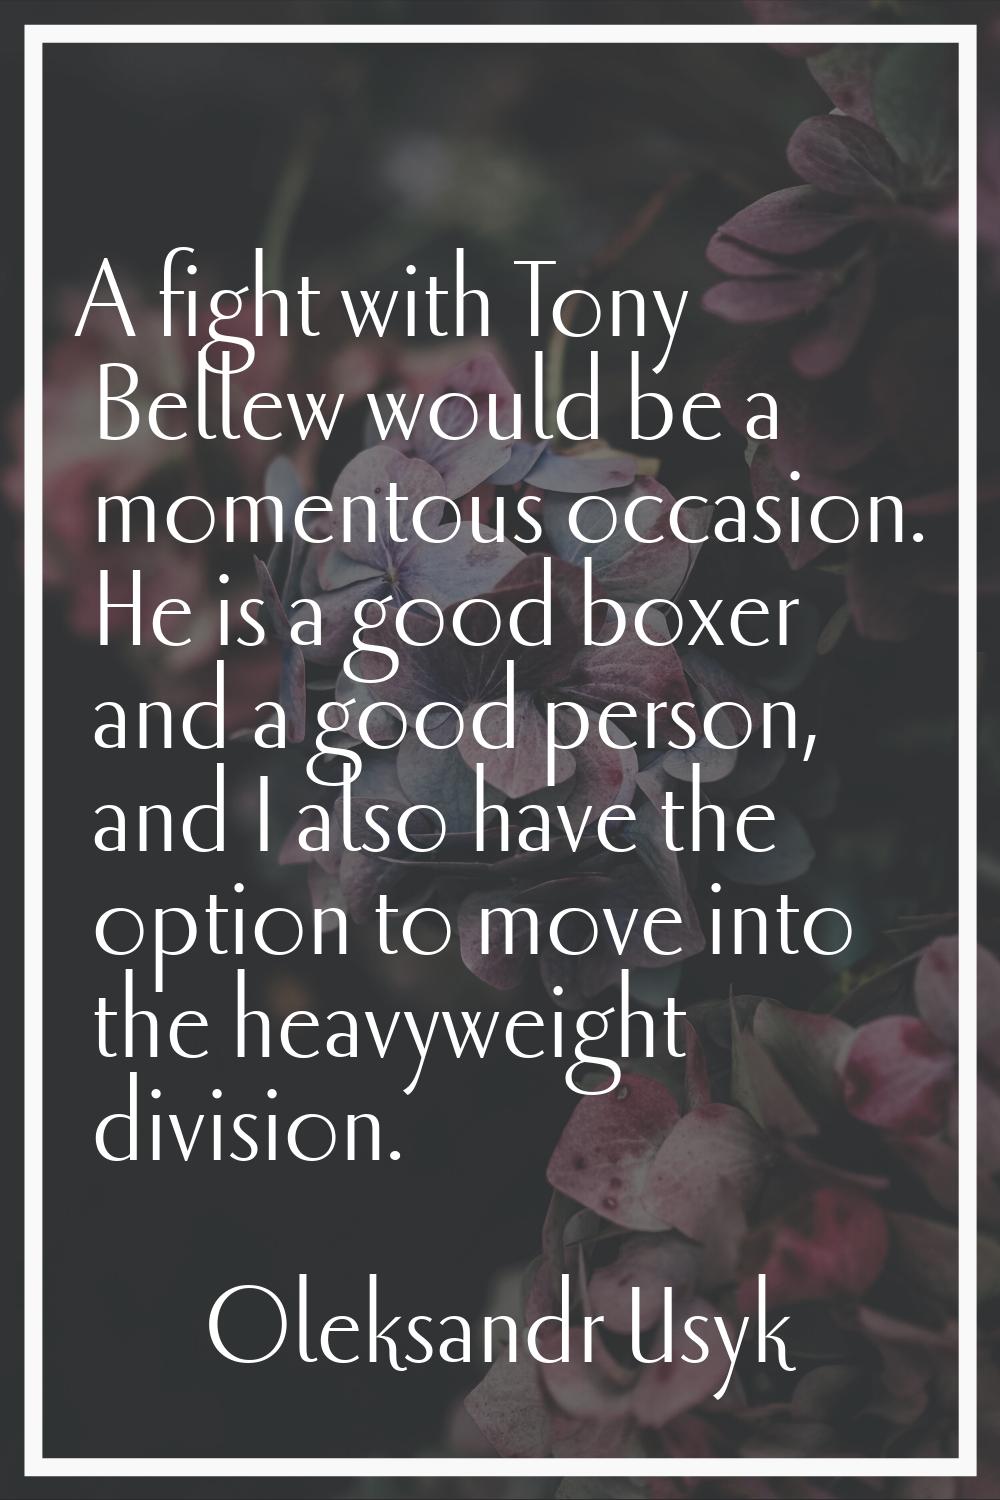 A fight with Tony Bellew would be a momentous occasion. He is a good boxer and a good person, and I